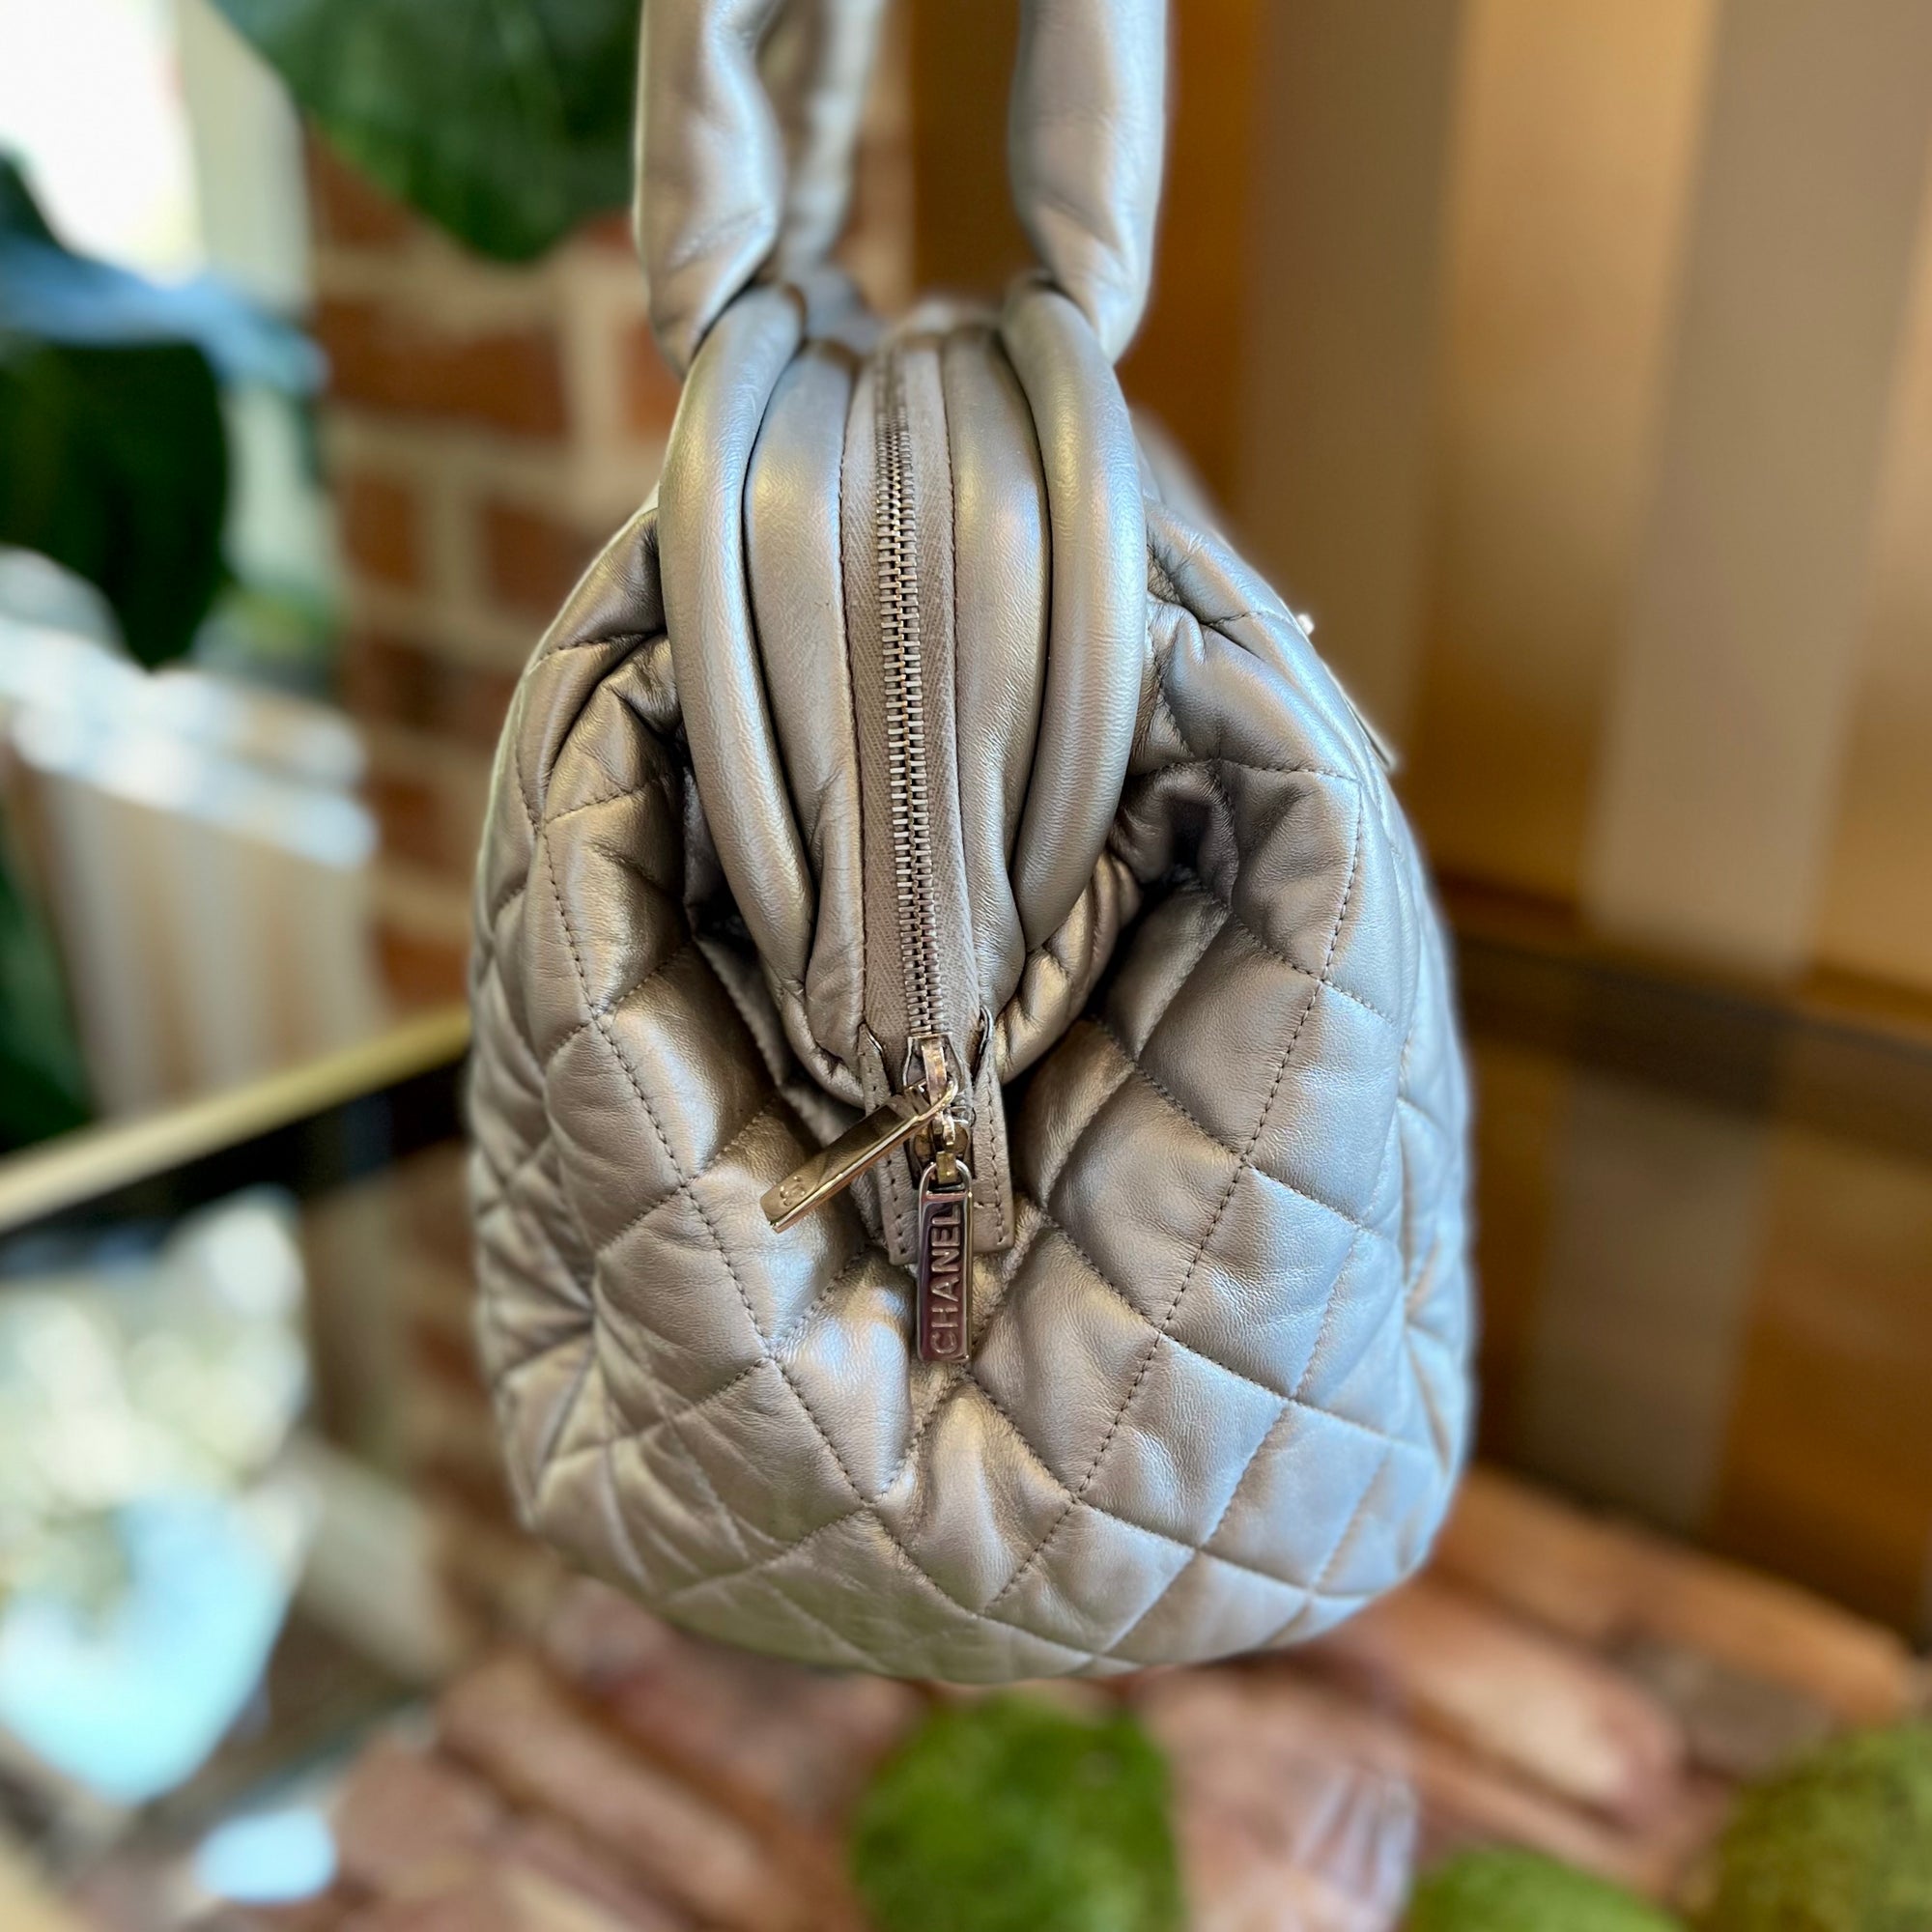 CHANEL Silver Cocoon Frame Bag TS3026